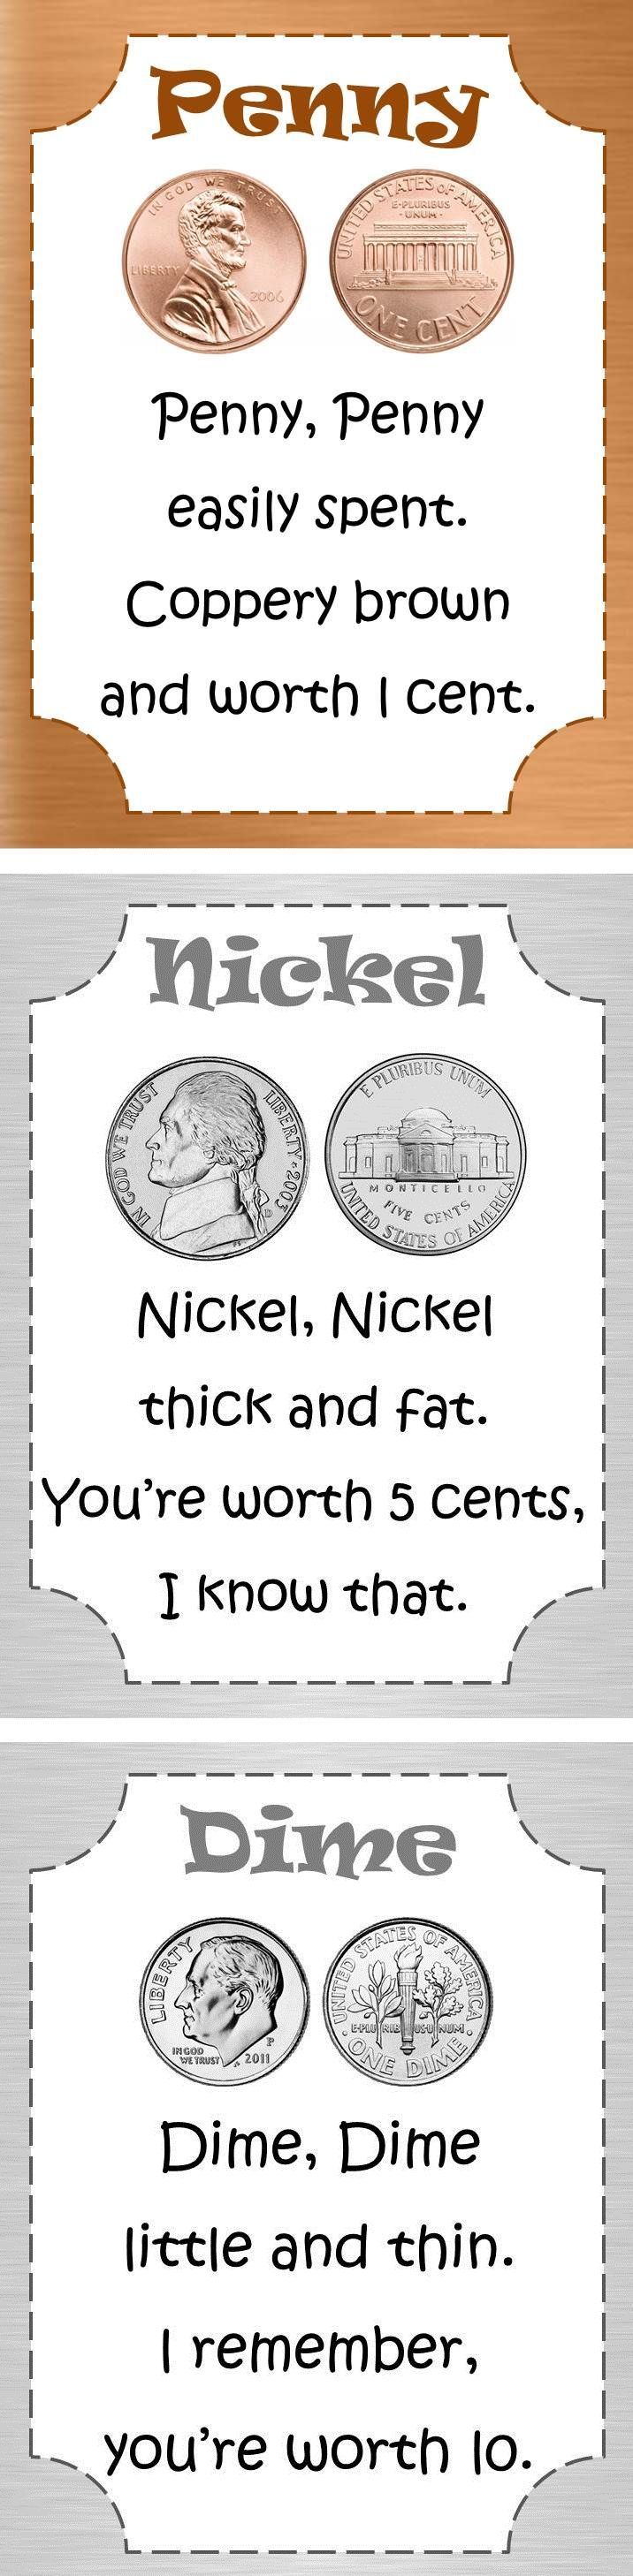 Coin poems to help students remember the value of pennies, nickels, and dimes.